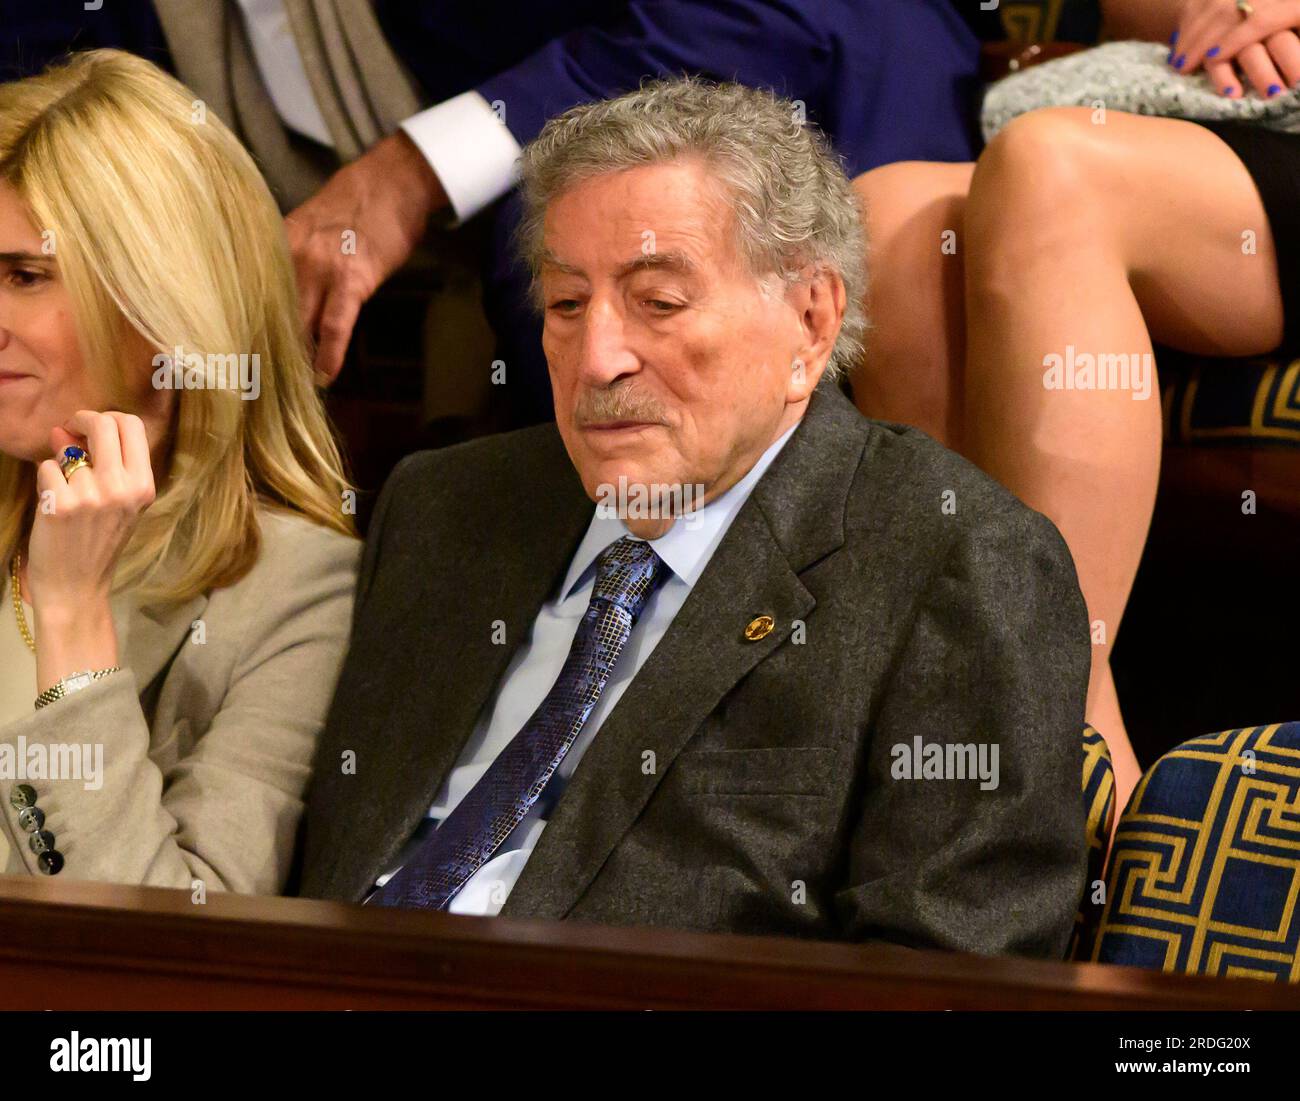 Washington, United States Of America. 03rd Jan, 2019. Singer Tony Bennett, a guest of Speaker of the United States House of Representatives Nancy Pelosi (Democrat of California), sits in the gallery as the 116th Congress convenes for its opening session in the US House Chamber of the US Capitol in Washington, DC on Thursday, January 3, 2019.Credit: Ron Sachs/CNP/Sipa USA (RESTRICTION: NO New York or New Jersey Newspapers or newspapers within a 75 mile radius of New York City) Credit: Sipa USA/Alamy Live News Stock Photo